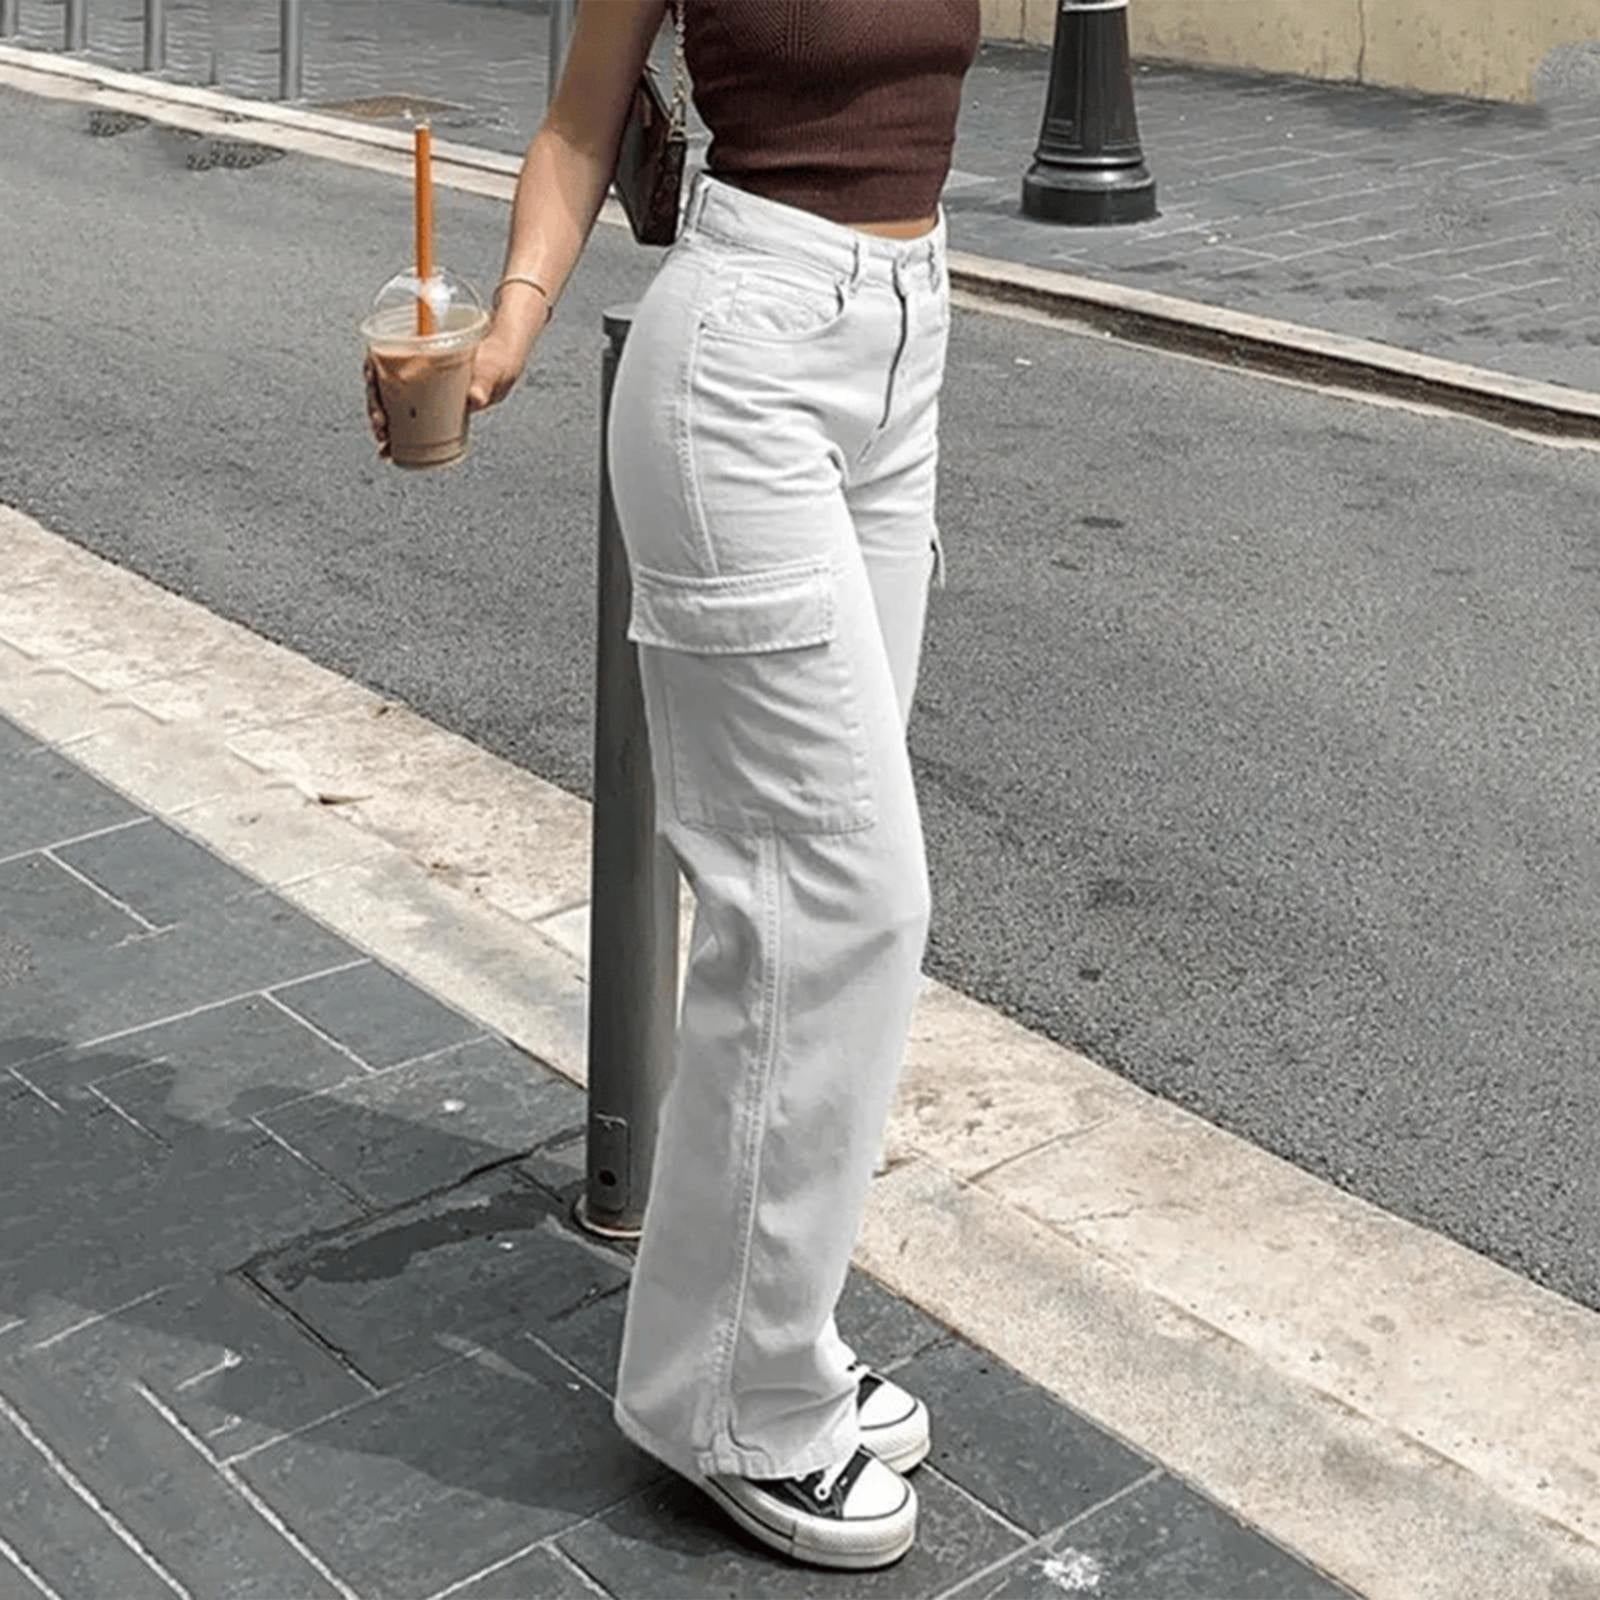 Nia Cargo Pants in Brown • Shop American Threads Women's Trendy Online  Boutique – americanthreads